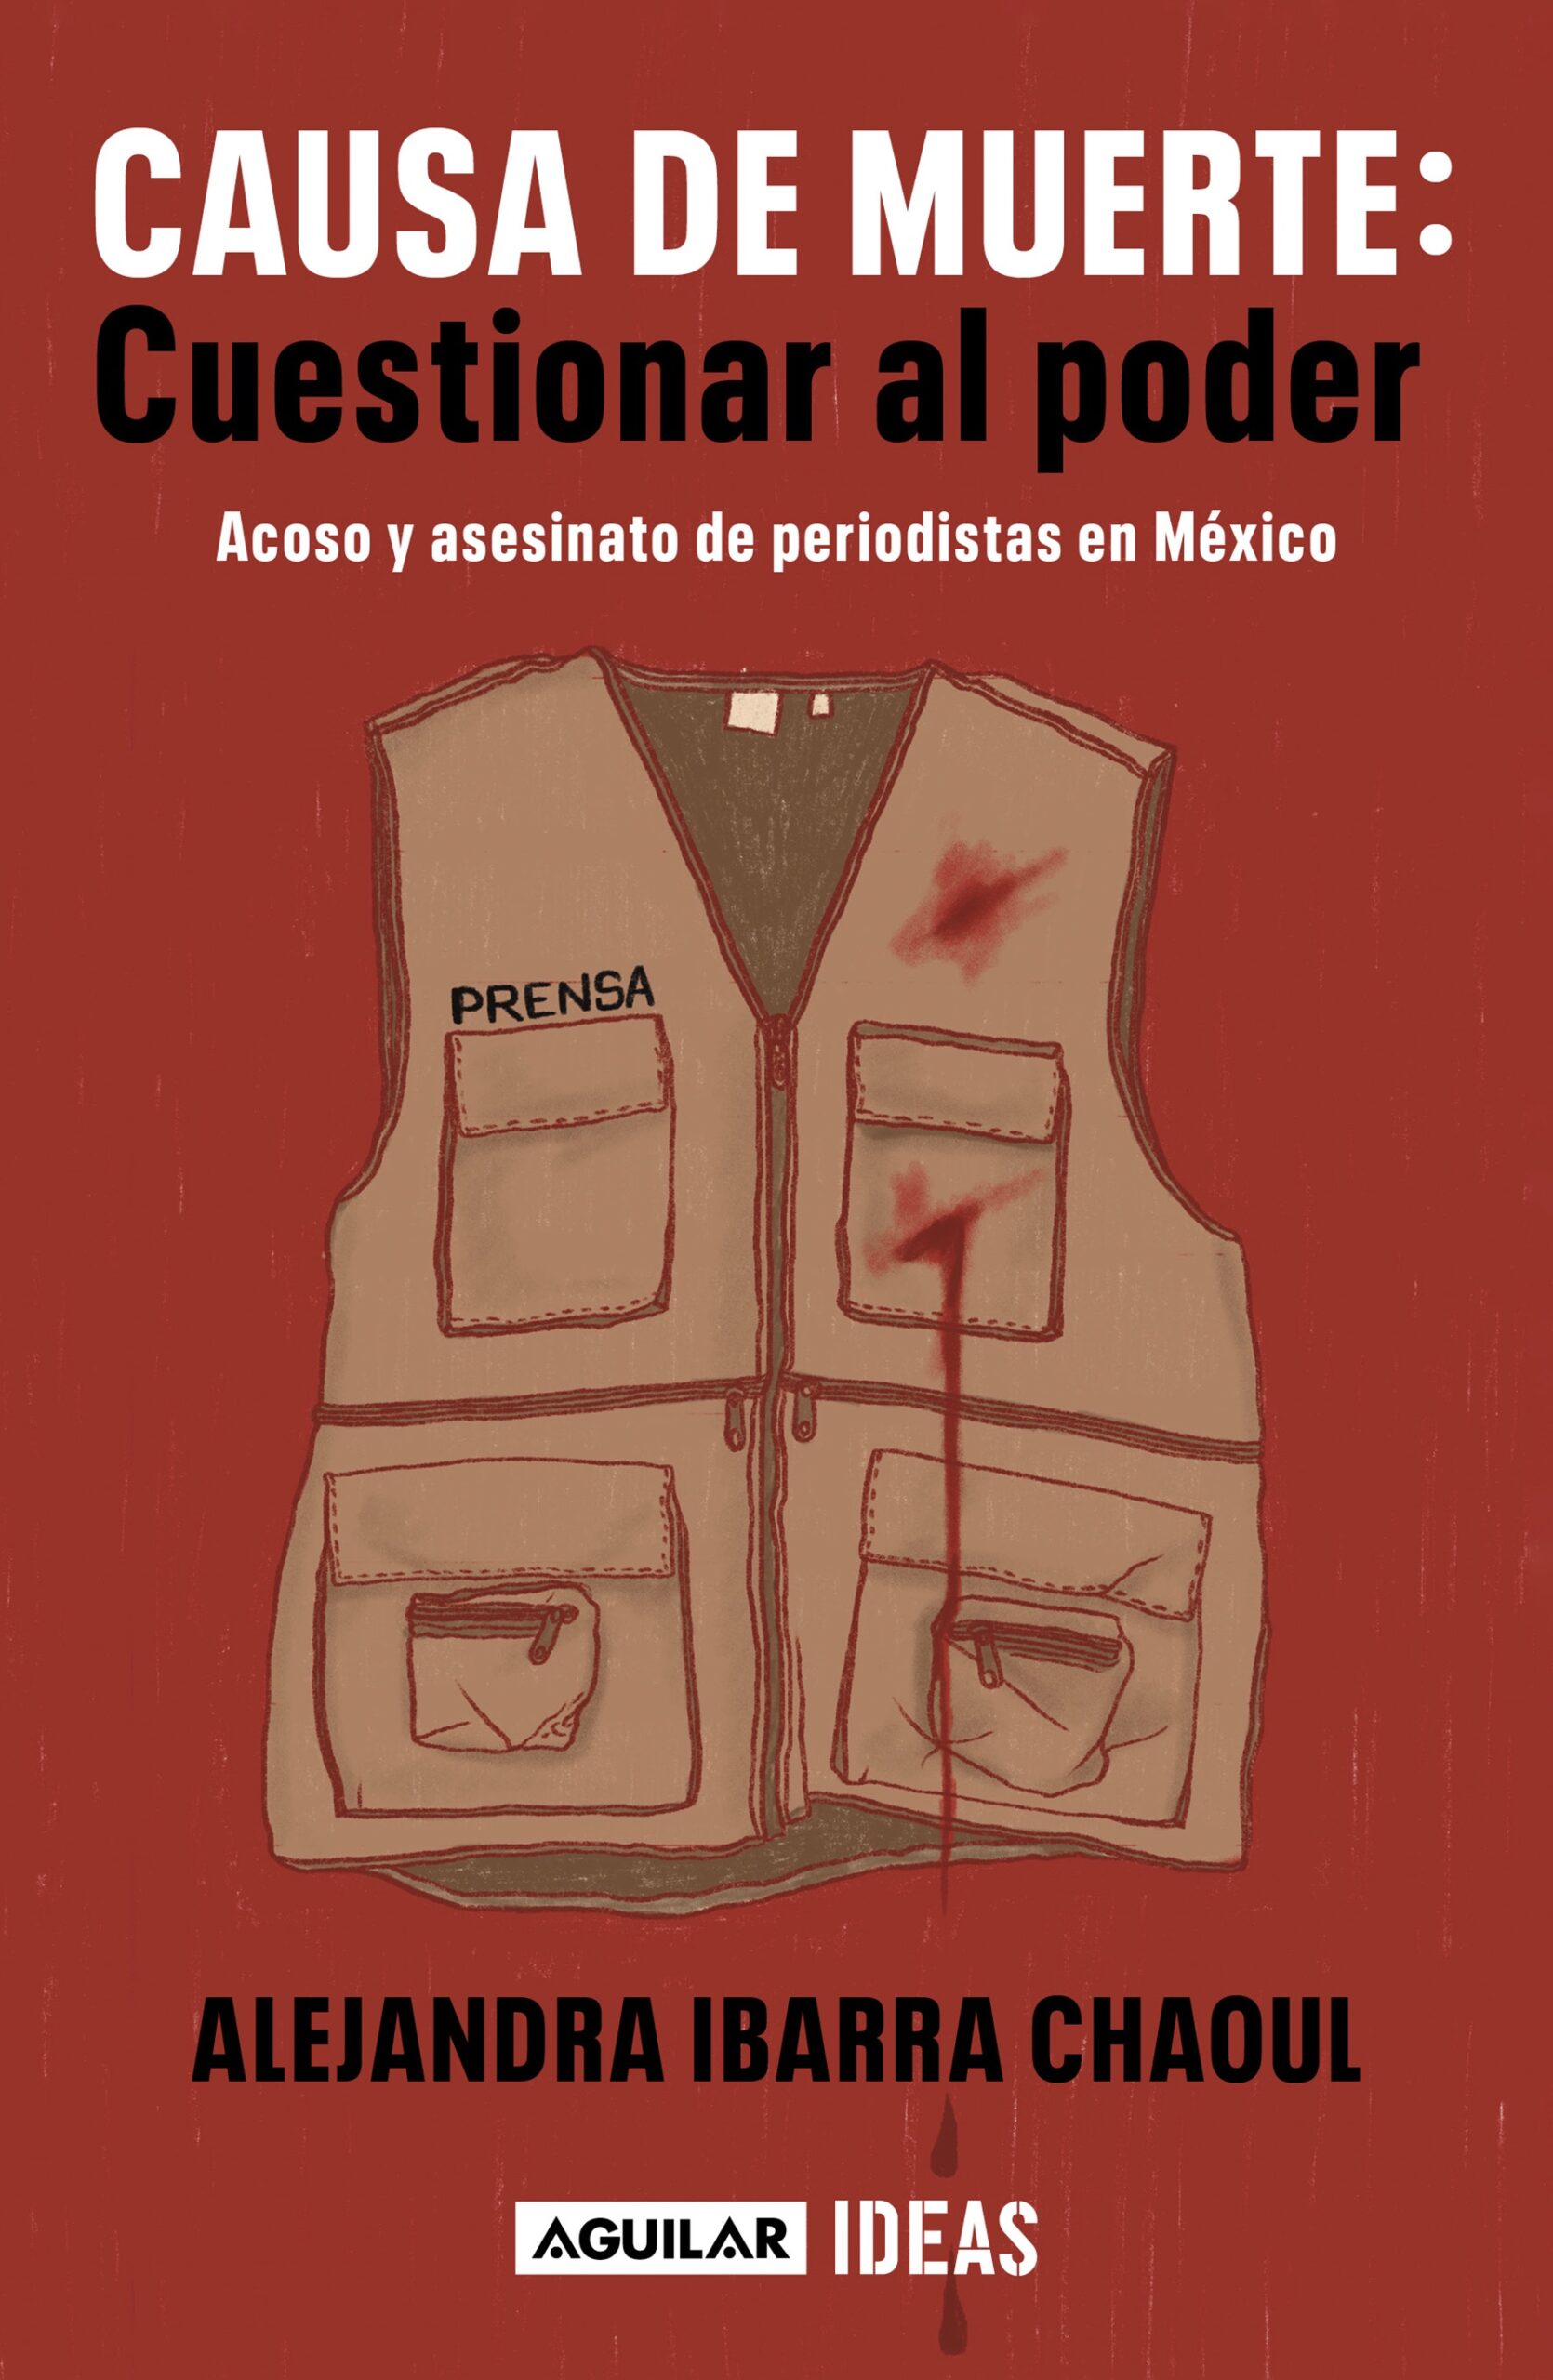 Cover of the book "Cause of Death: Questioning Power", by Mexican journalist Alejandra Ibarra